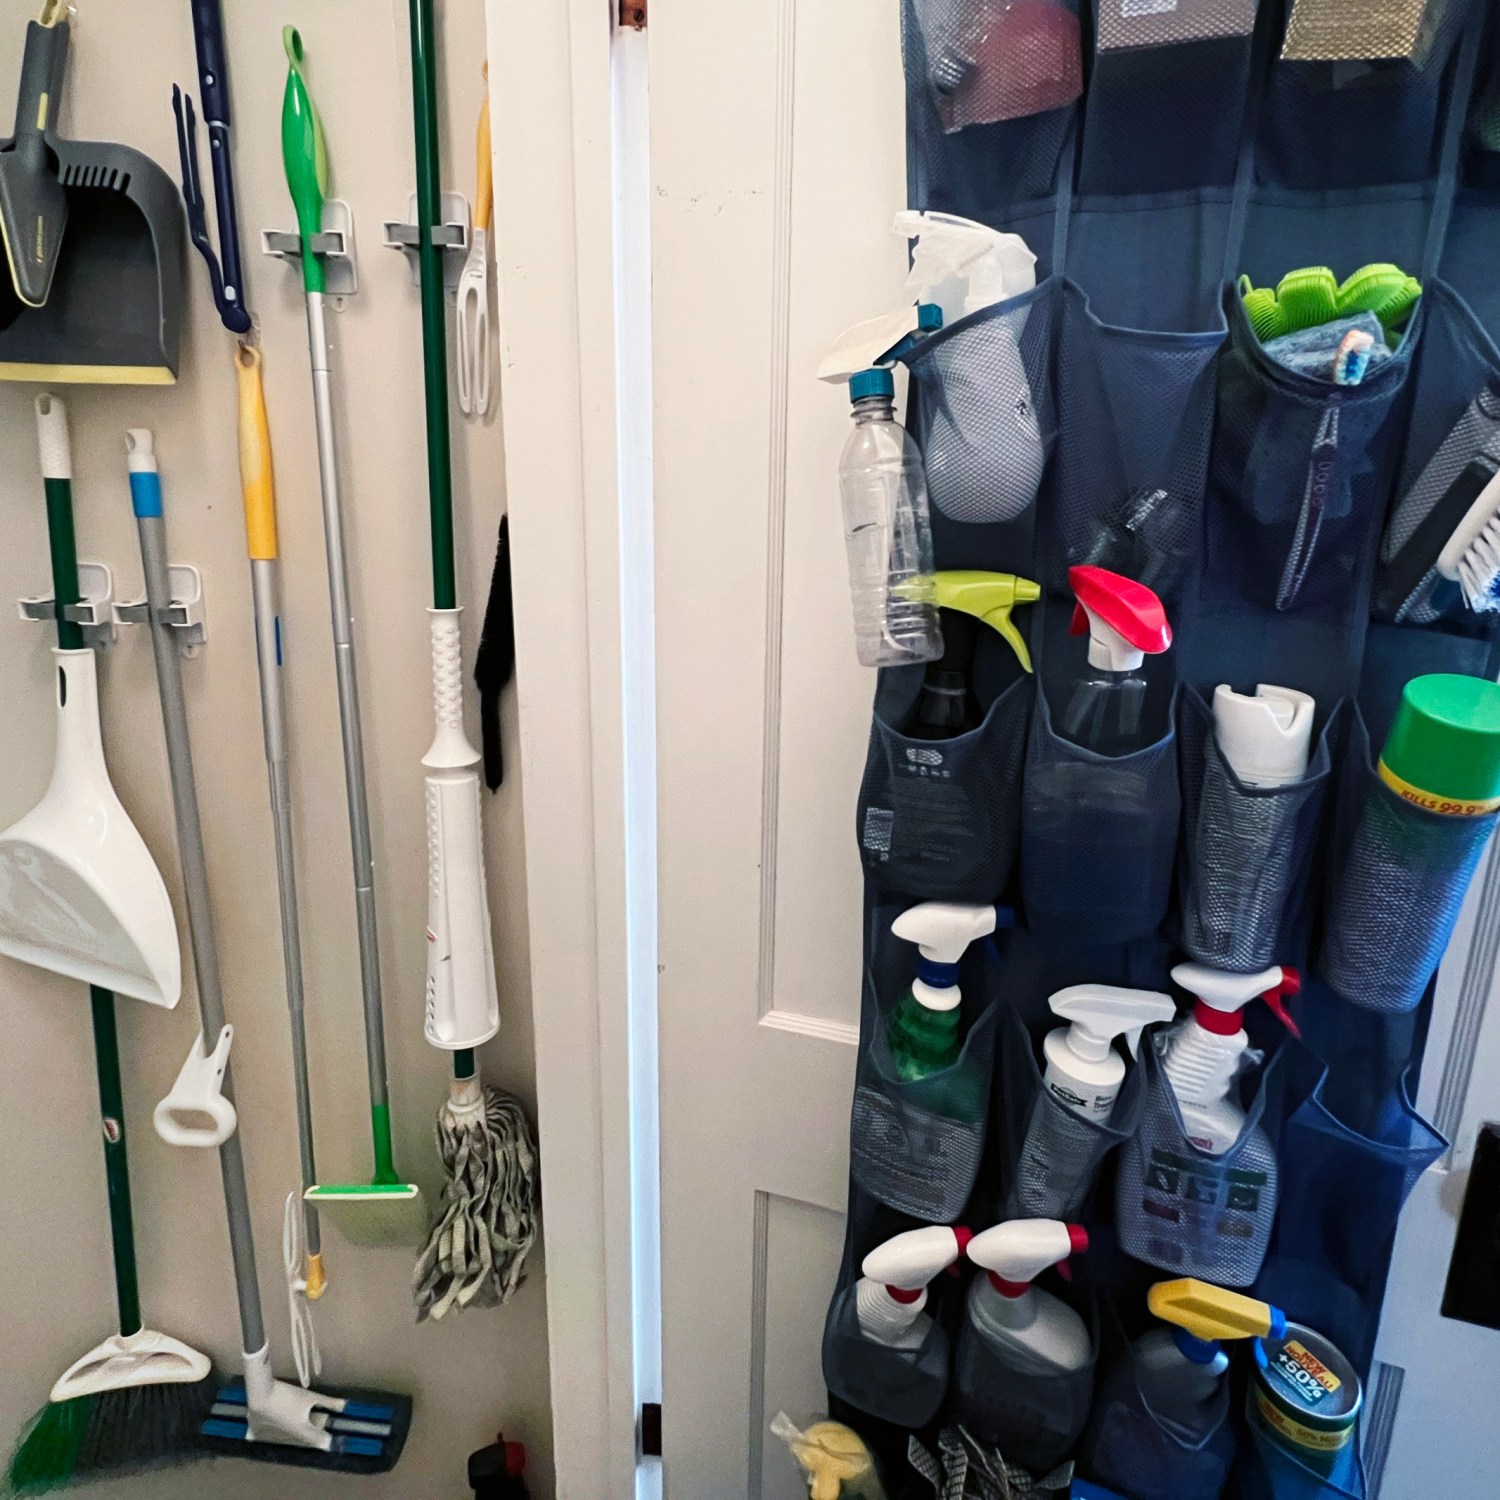 home cleaning products organized in hallway to basement shoe caddy on door broom mops dusters hang on wall